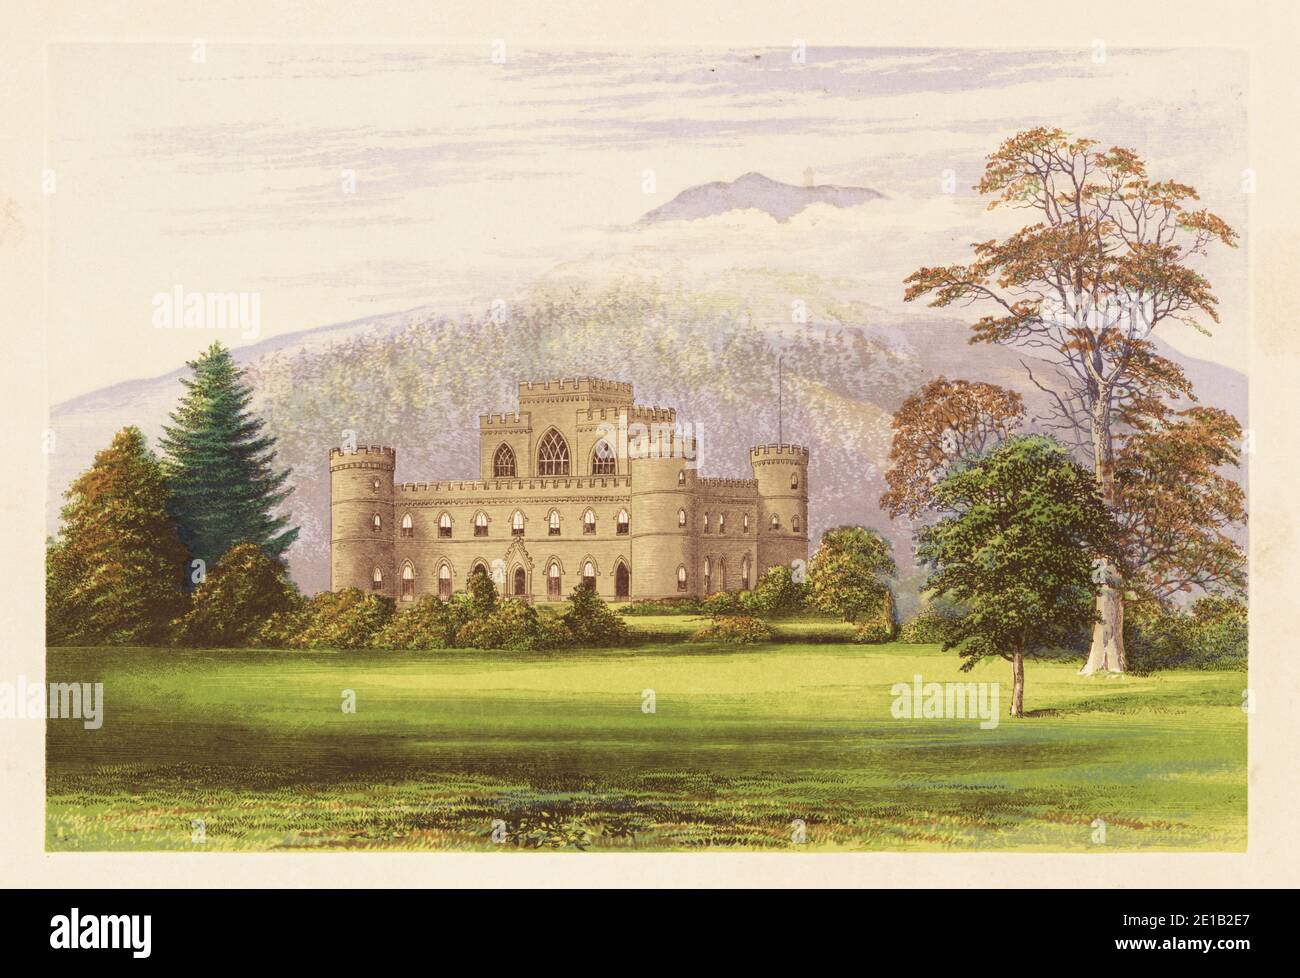 Inverary Castle, Argyll, Scotland. Gothic Revival-style castle with crenellated walls and circular towers built in 1743 by William Adam and Roger Morris, with neo-classical rooms by Robert Mylne for John Campbell, 5th Duke of Argyll. Colour woodblock by Benjamin Fawcett in the Baxter process of an illustration by Alexander Francis Lydon from Reverend Francis Orpen Morris’s Picturesque Views of the Seats of Noblemen and Gentlemen of Great Britain and Ireland, William Mackenzie, London, 1880. Stock Photo